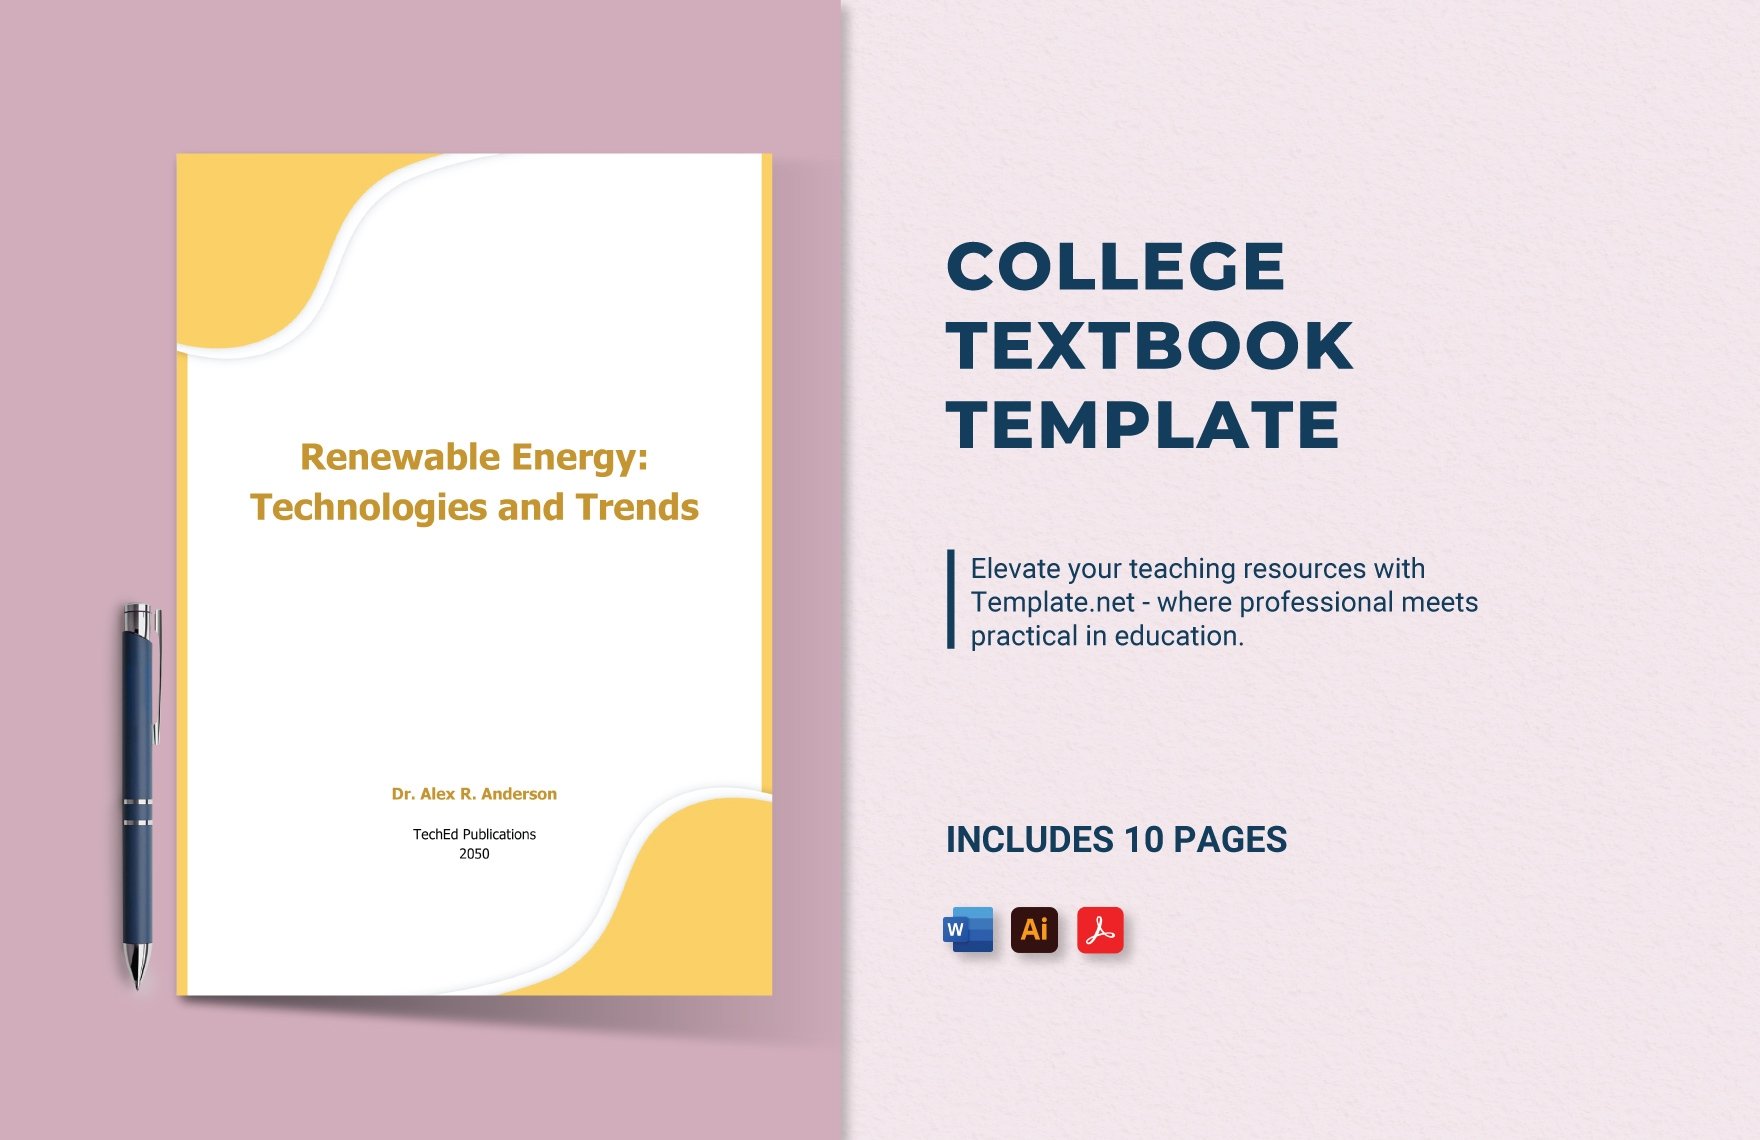 College Textbook Template